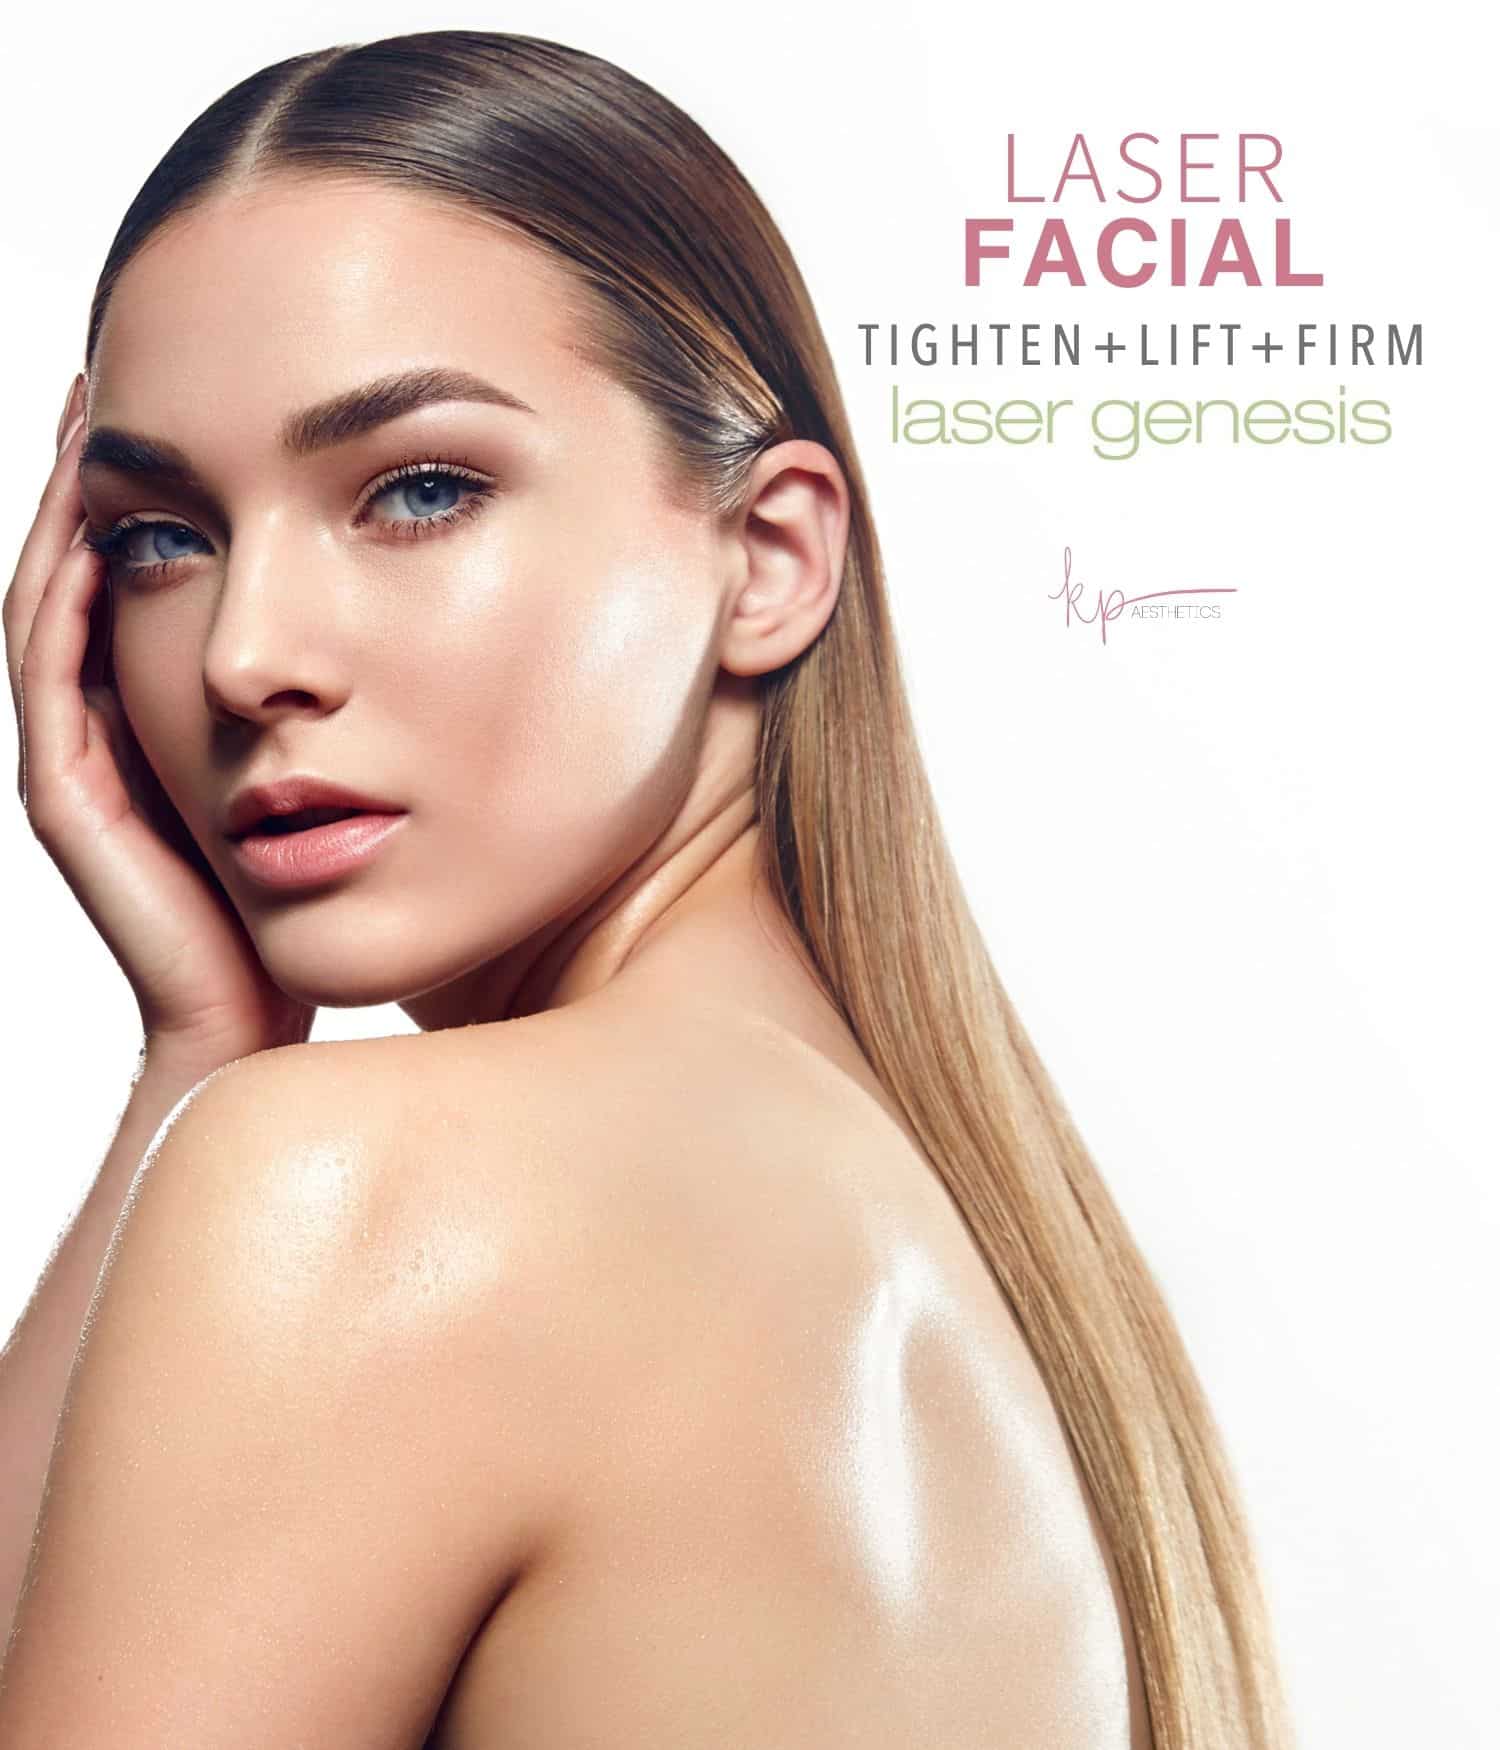 Woman with firm and beautiful skin models her laser facial results.